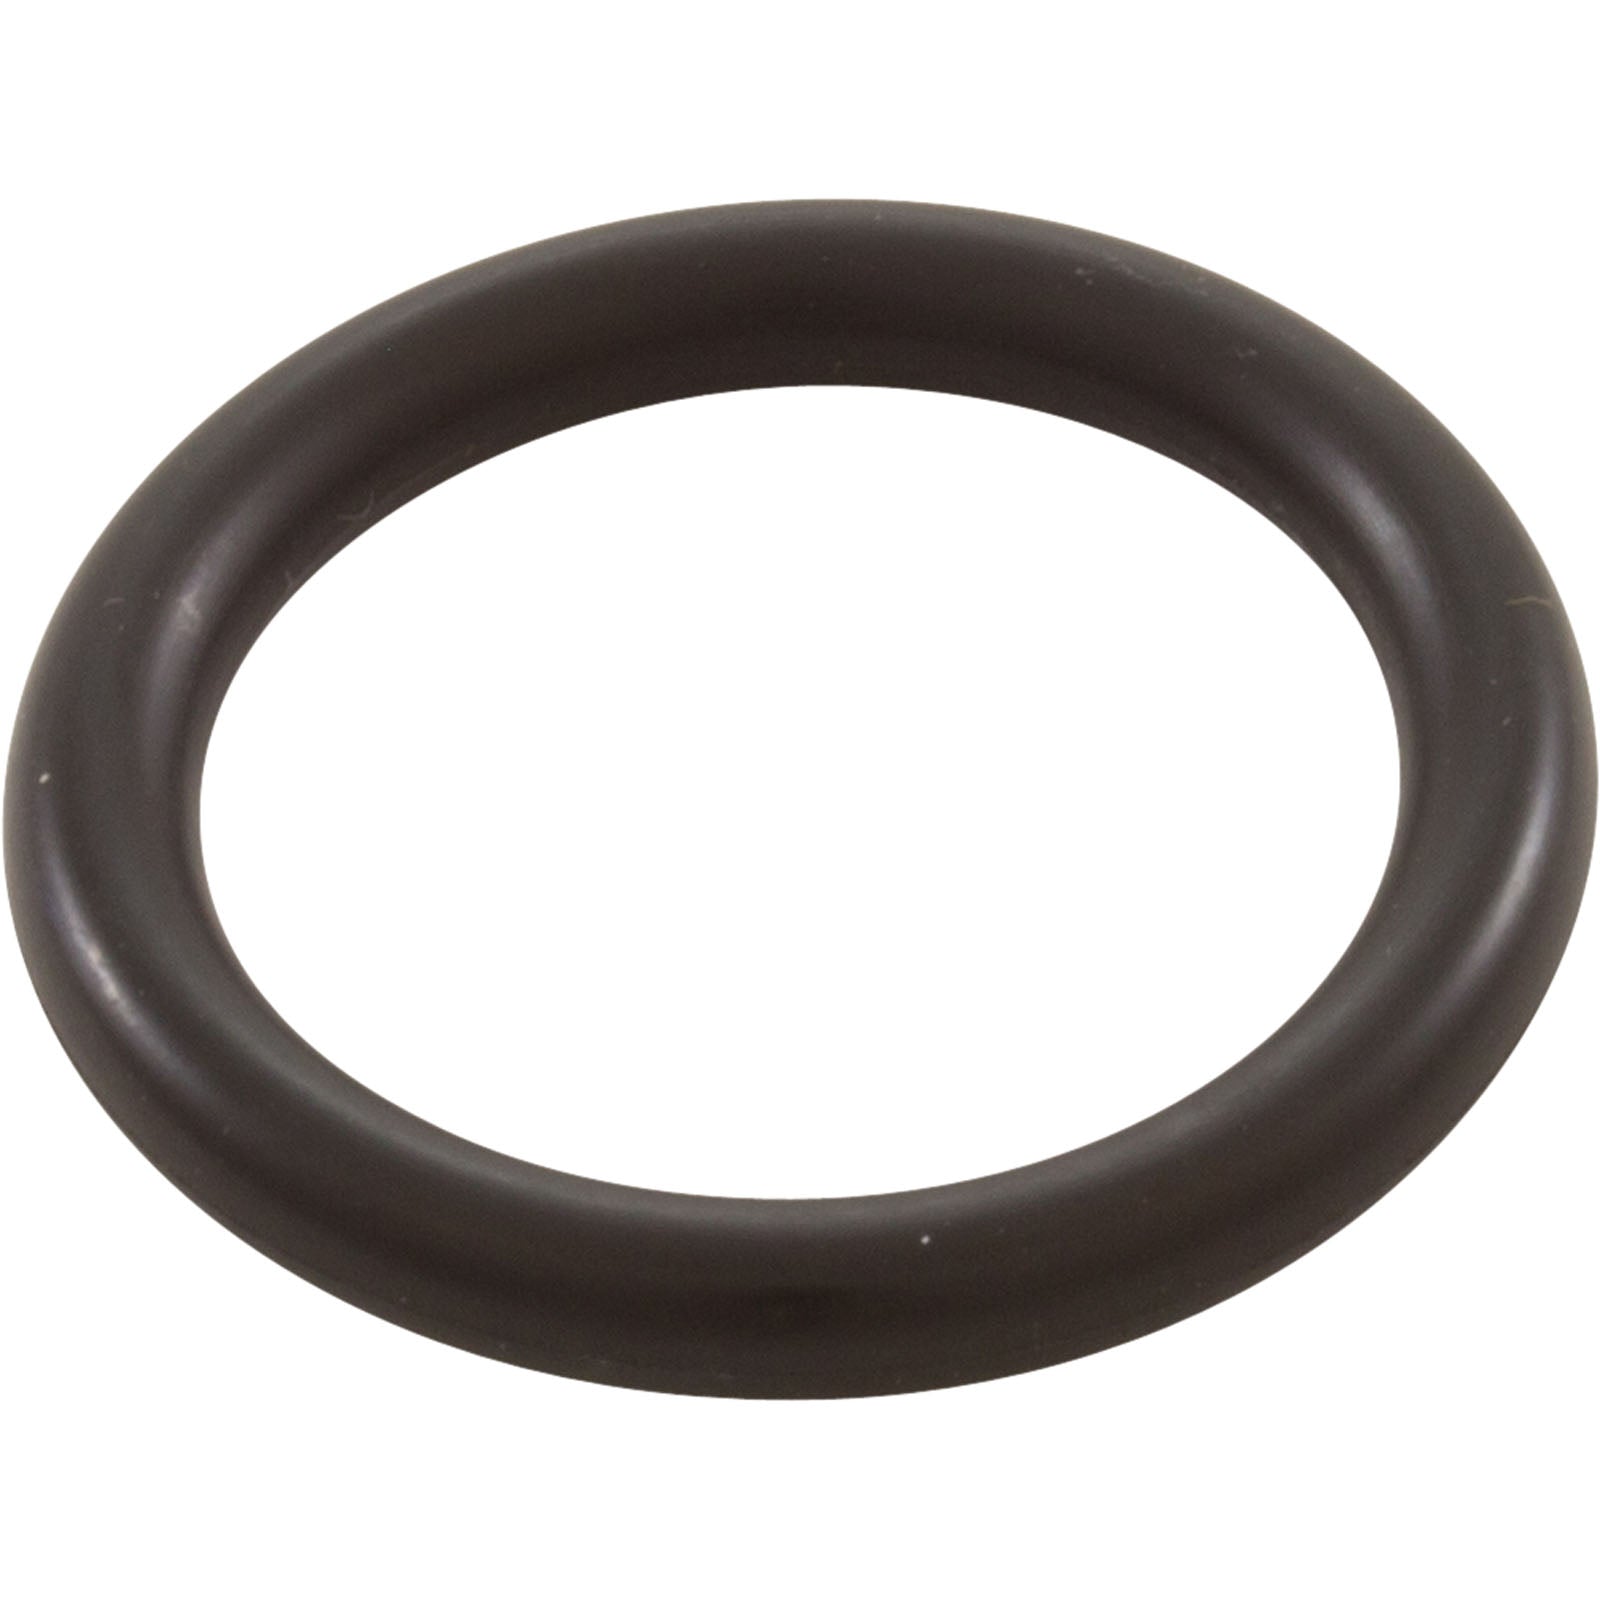 Zodiac/Polaris 6-505-00 UWF Connector O-Ring for Pool Cleaners